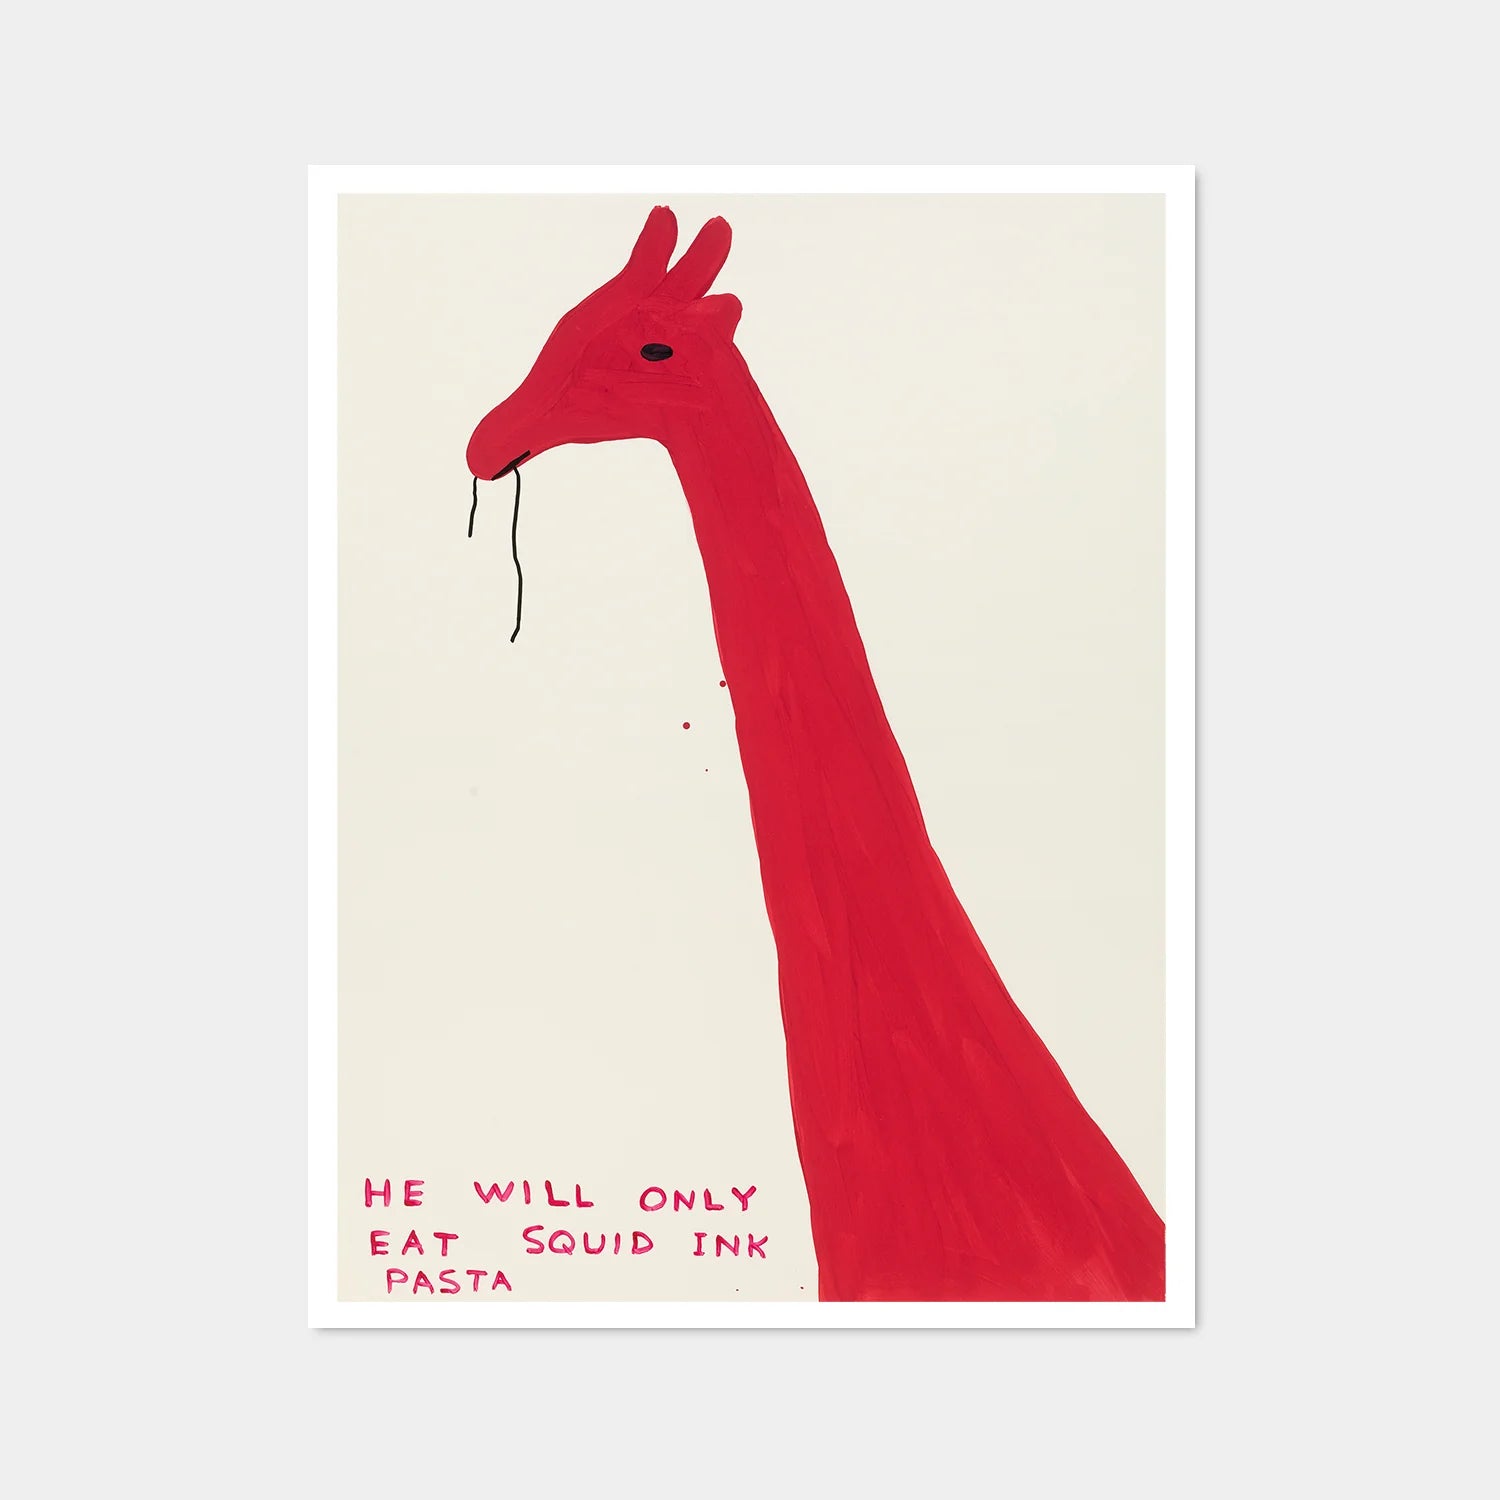 David Shrigley print of a red giraffe eating a piece of squid on a white background 